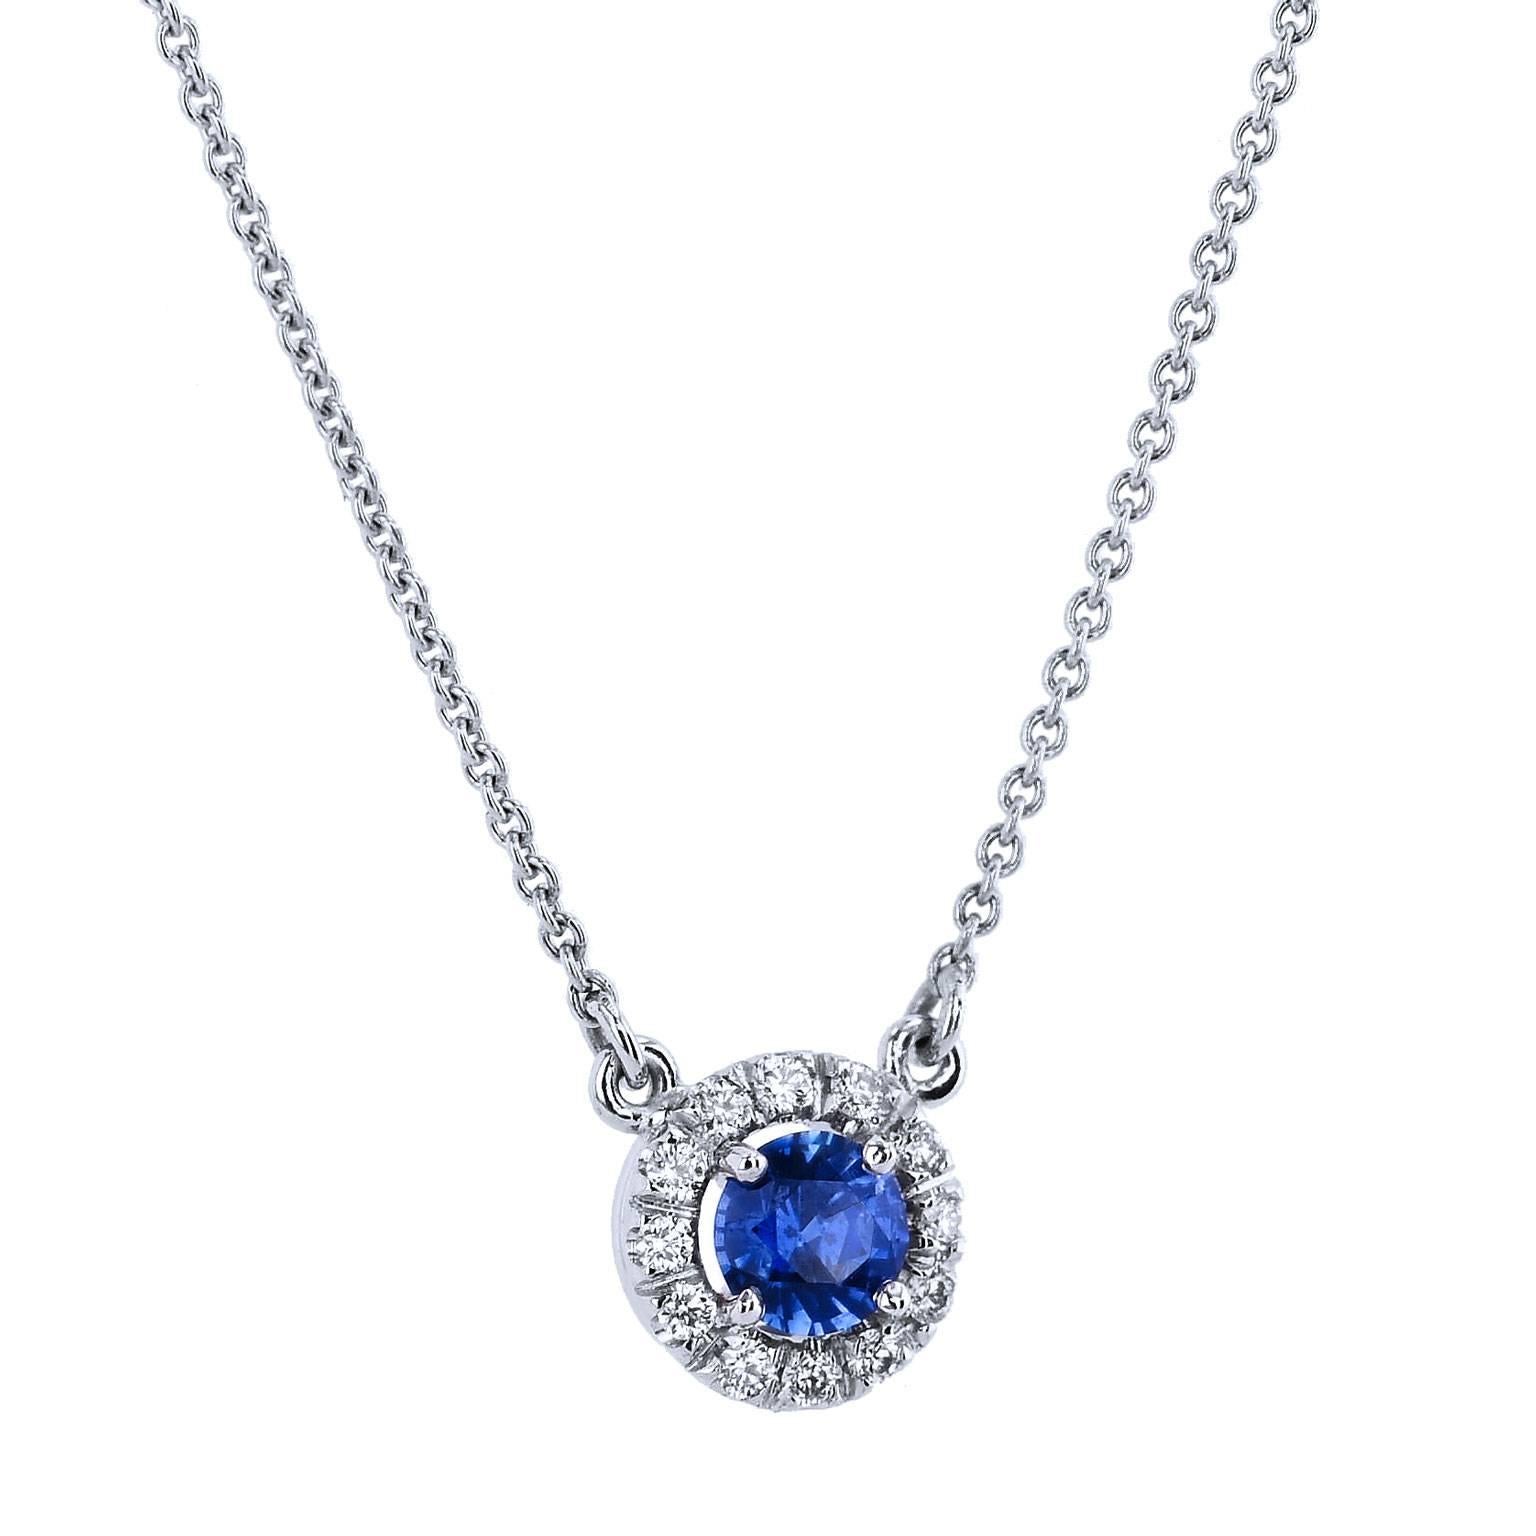 Let the sapphire’s tranquil blue hue sweep you away in this handcrafted 18 karat white gold pendant necklace. A 0.45 carat royal blue sapphire is set at center and embraced by 0.12 carat of pave set diamond in halo (H/VS). Strung on an 18 kart white